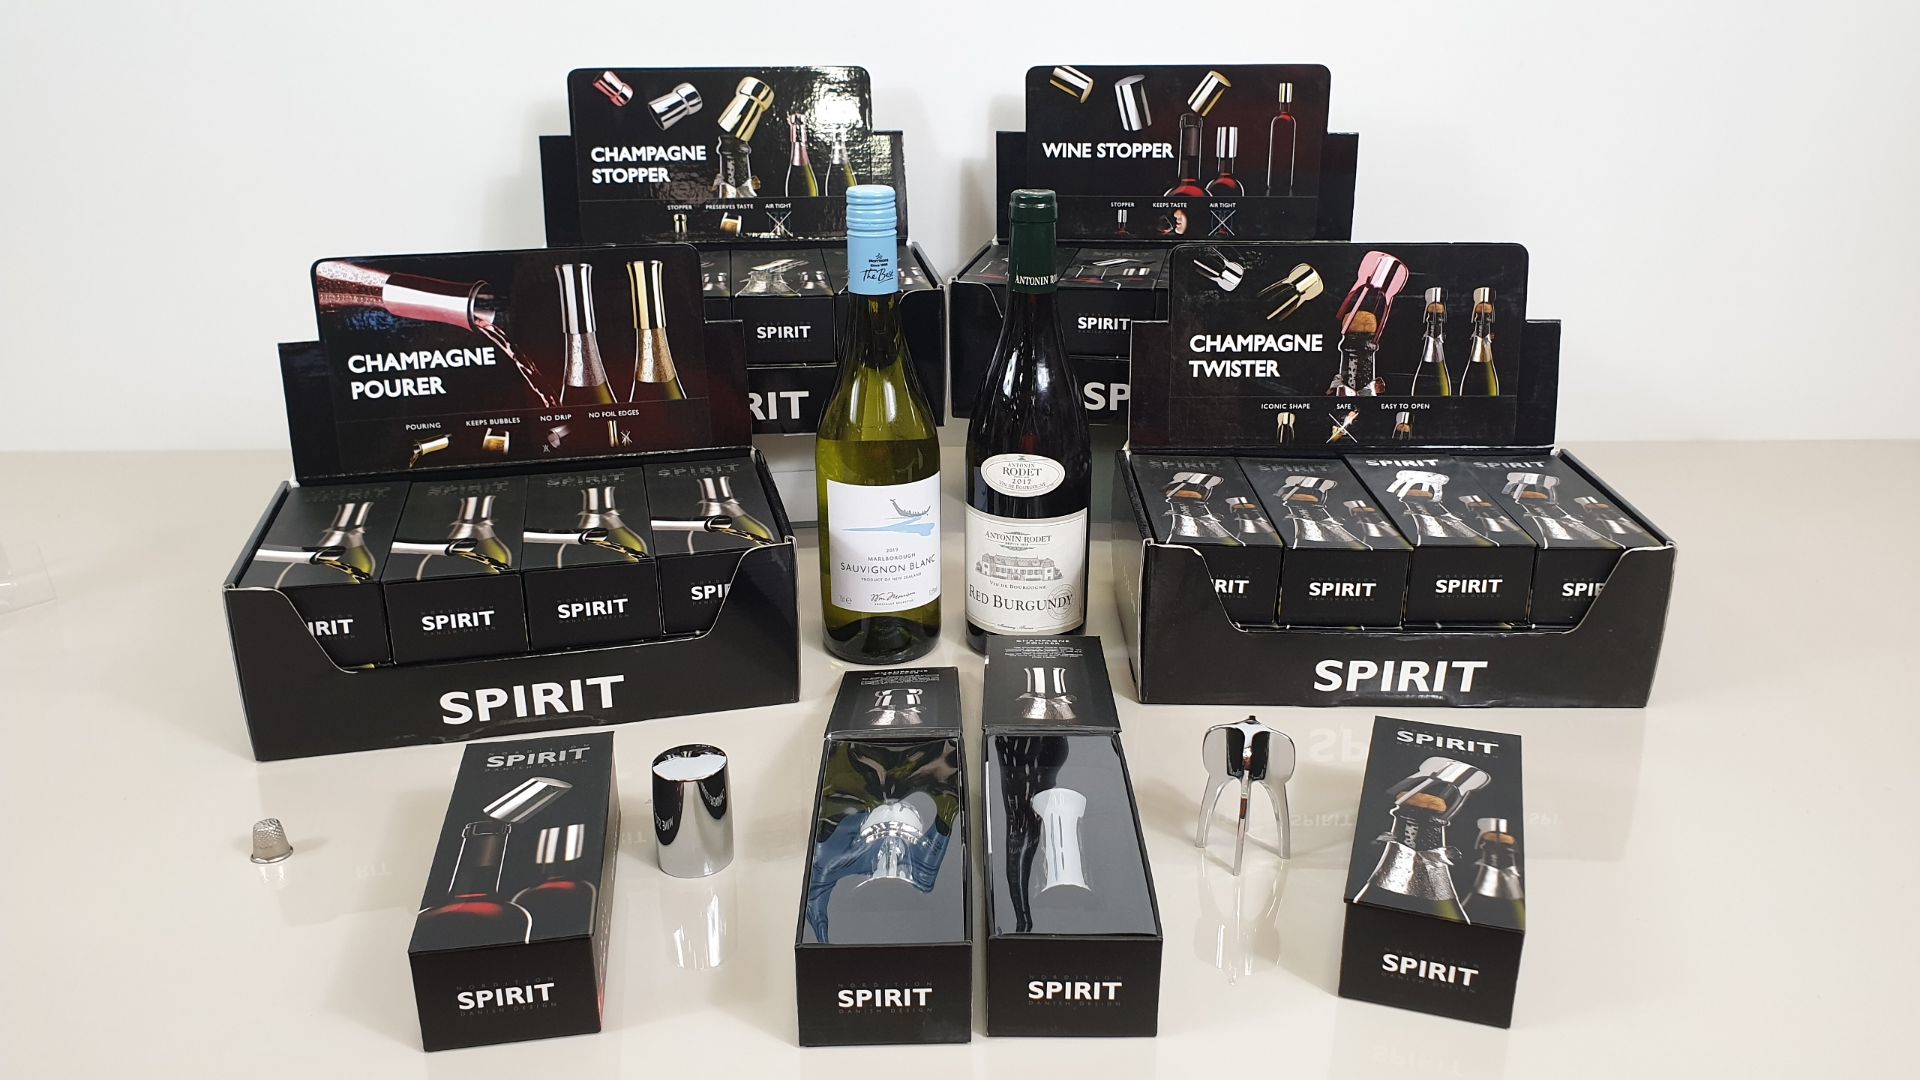 32 X NORDITION SILVER COLOURED SPIRIT CHAMPAGNE / WINE ACCESSORIES IN 4 DISPLAY CARTONS (8 X